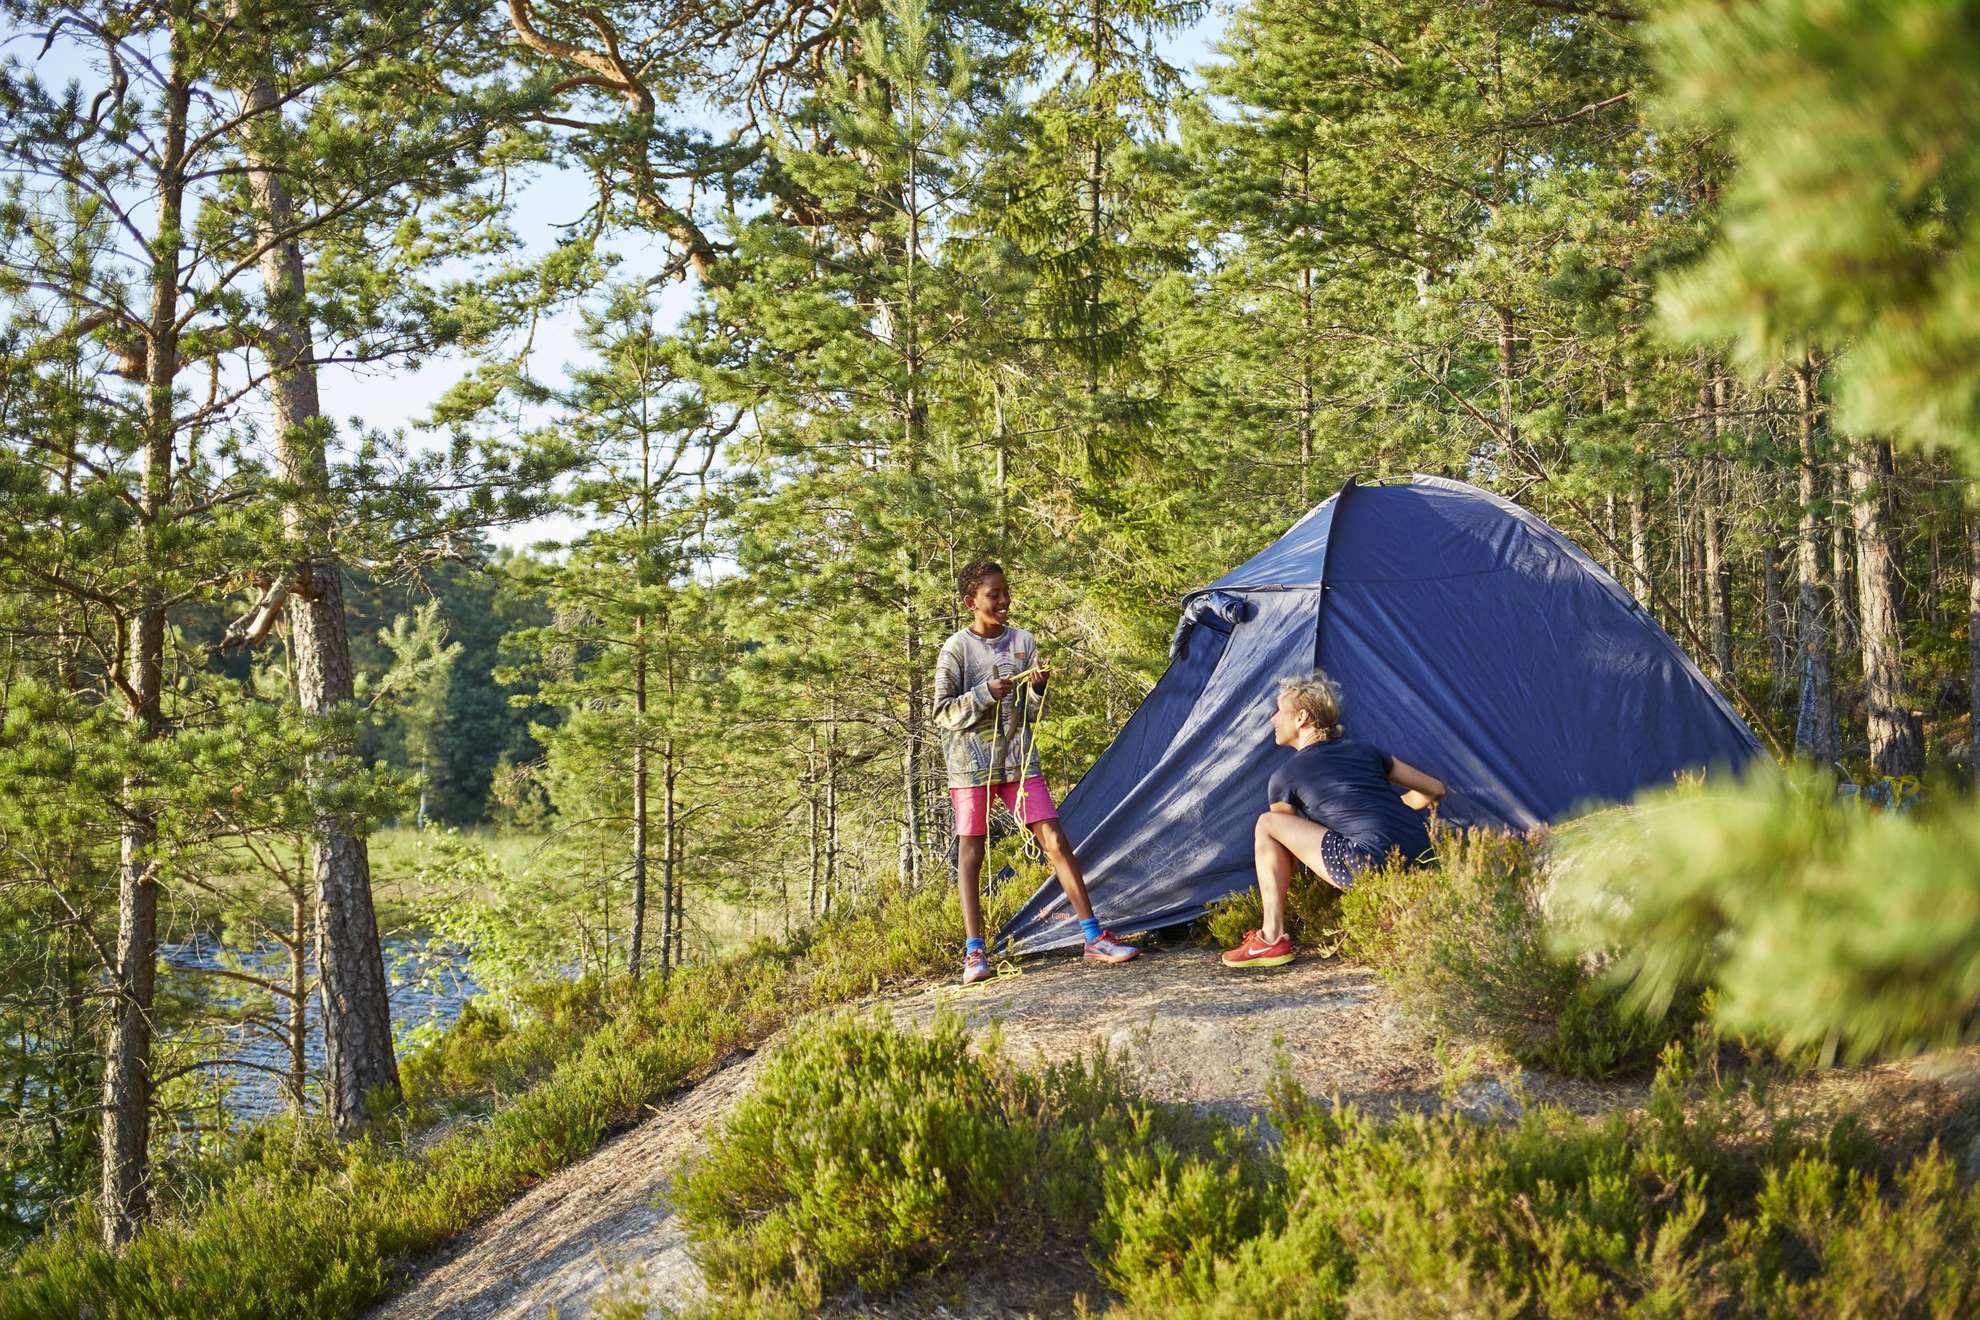 places to visit in sweden in summer